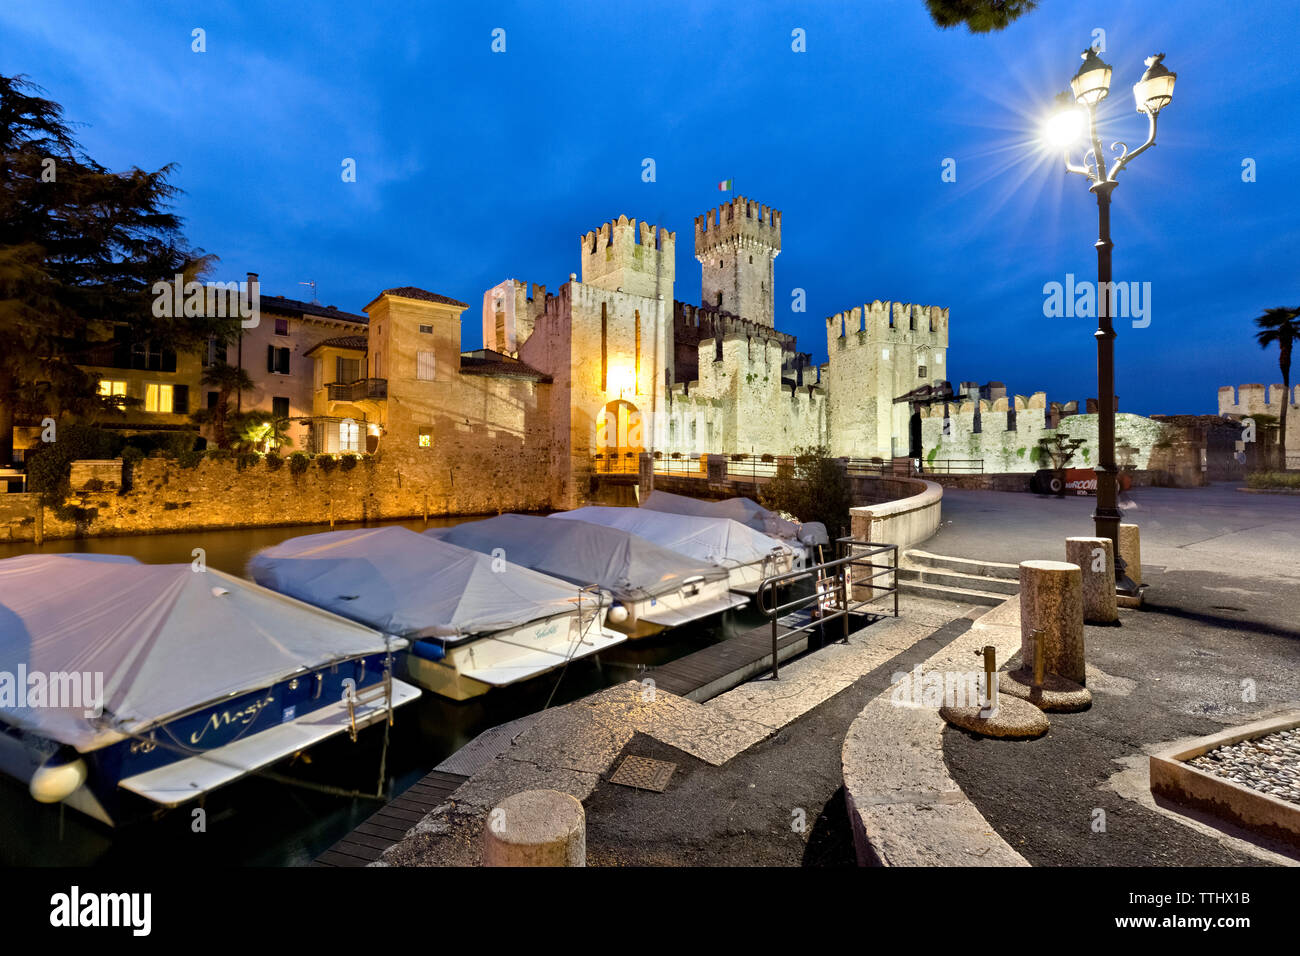 Evening at the Scaligero castle in Sirmione. Lake Garda, Brescia province, Lombardy, Italy, Europe. Stock Photo